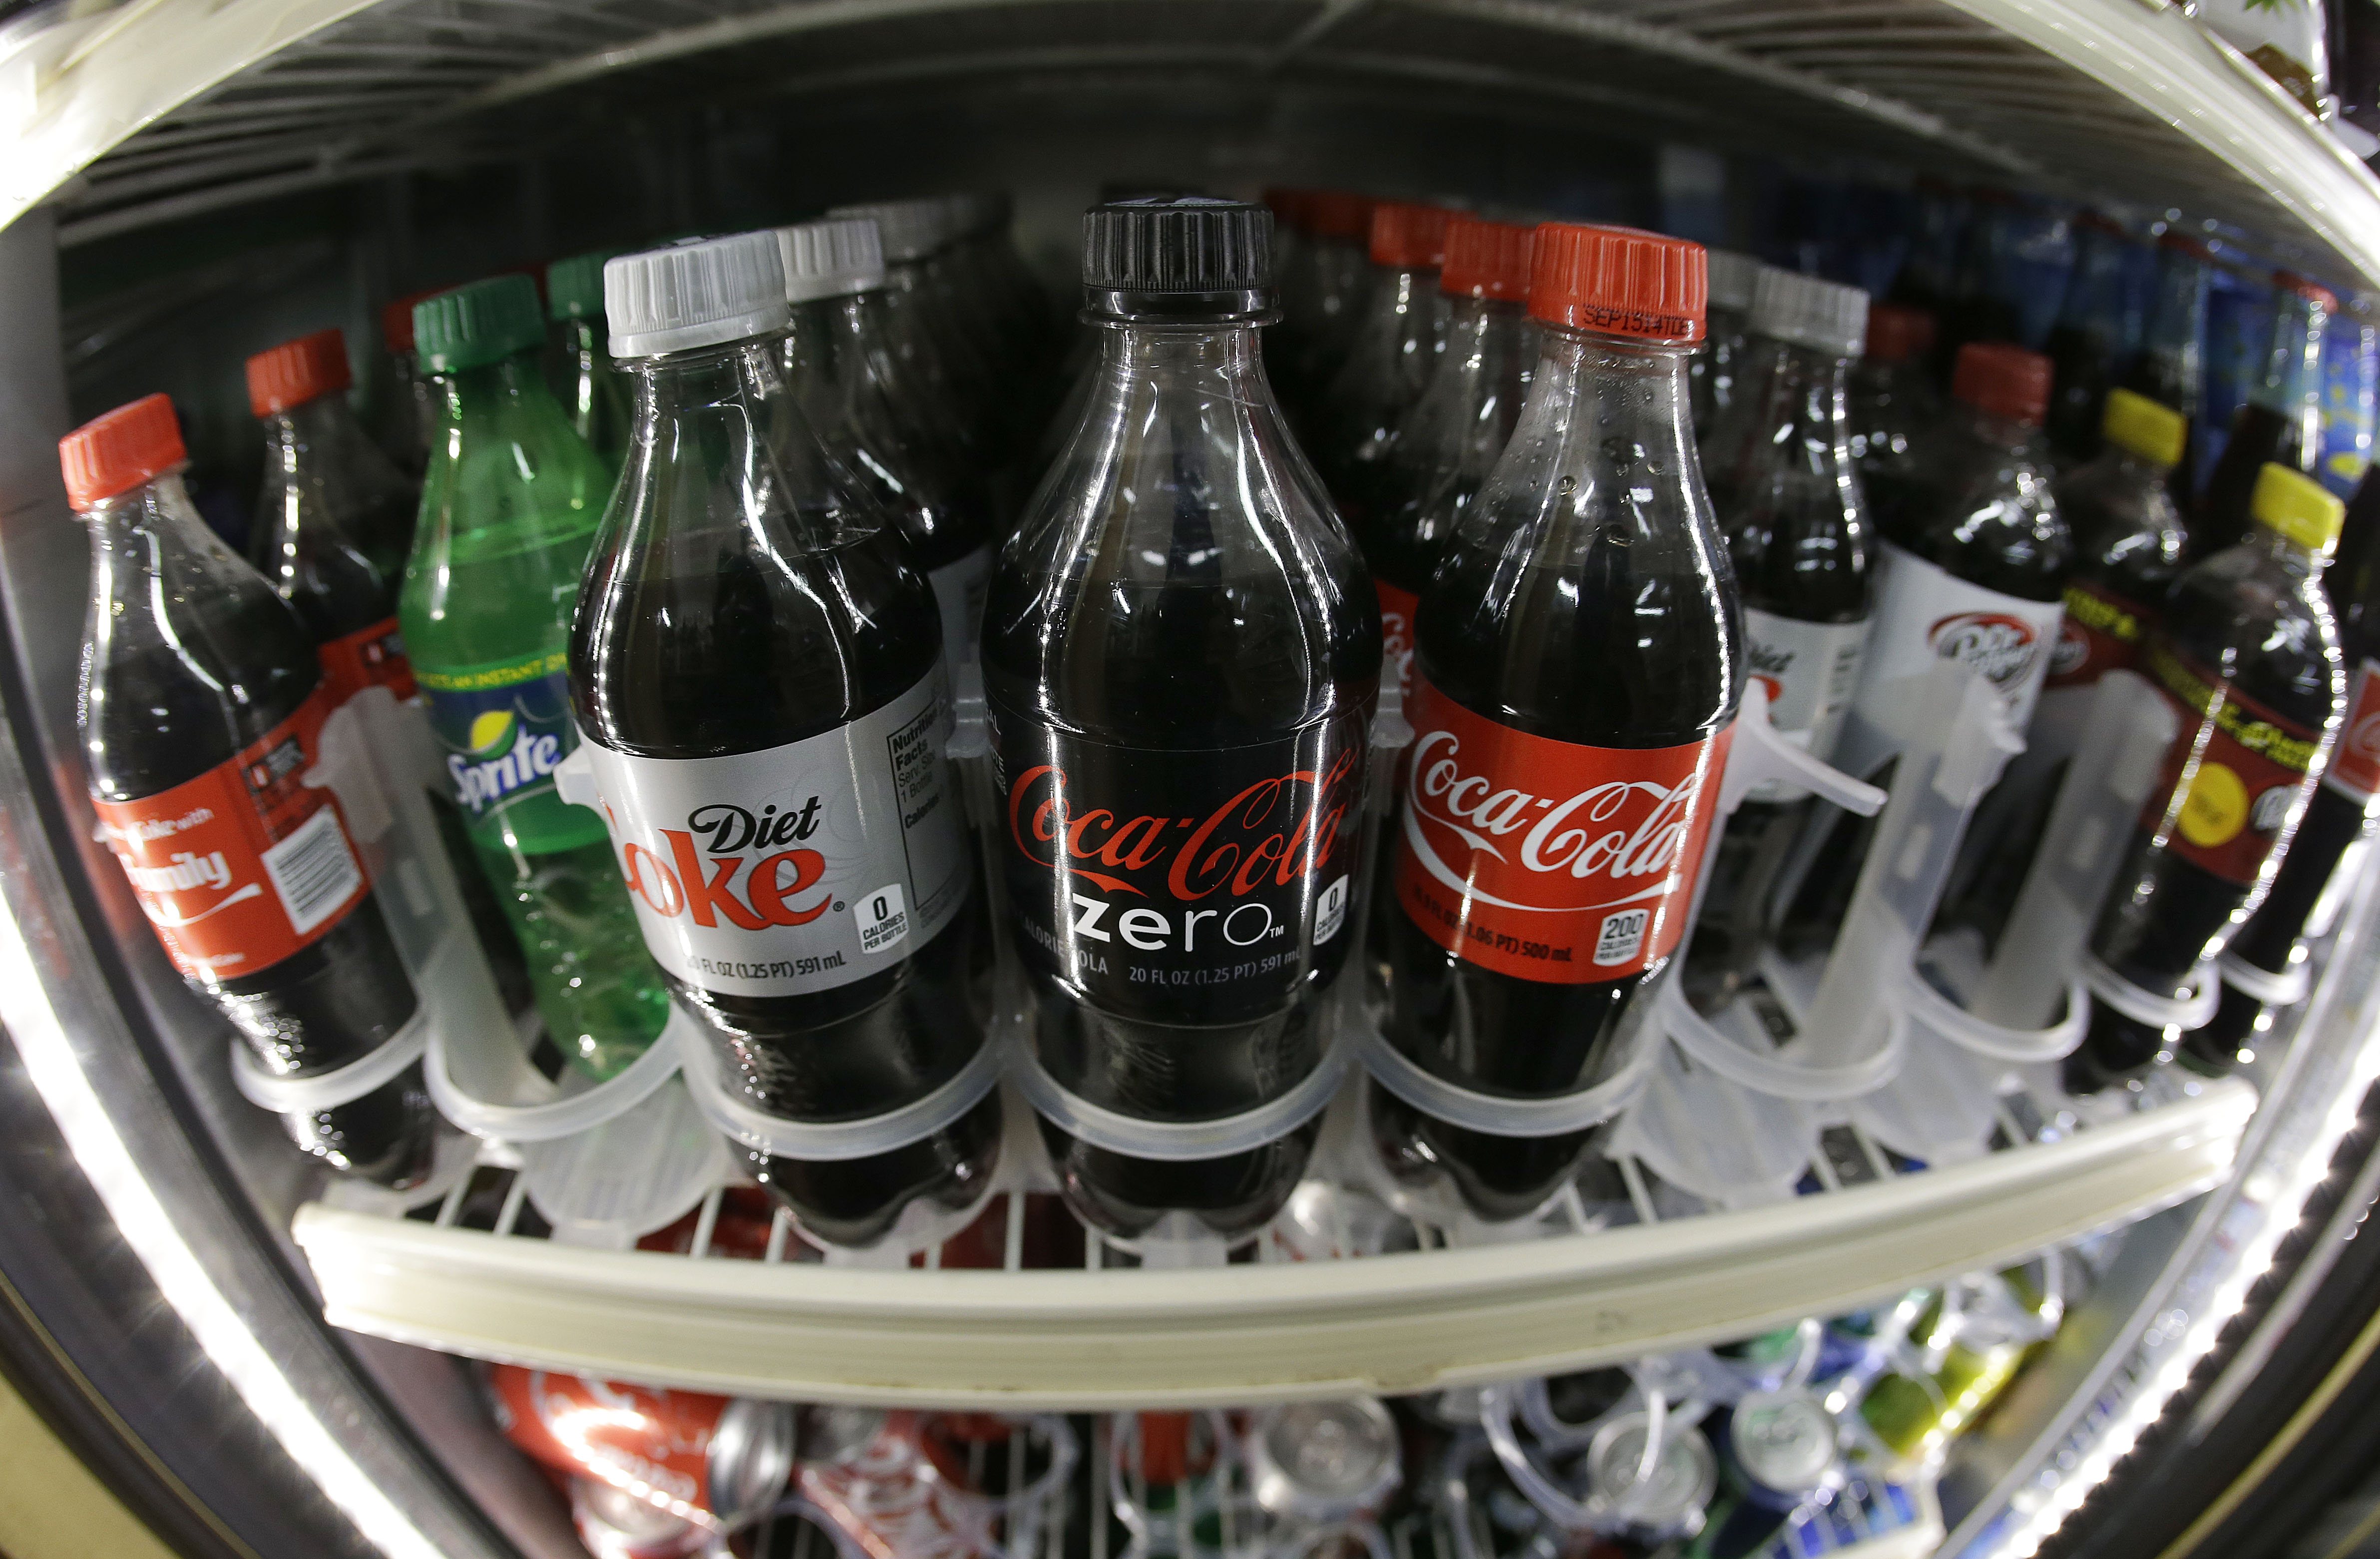 Study: Girls who consume more sugary drinks start periods earlier